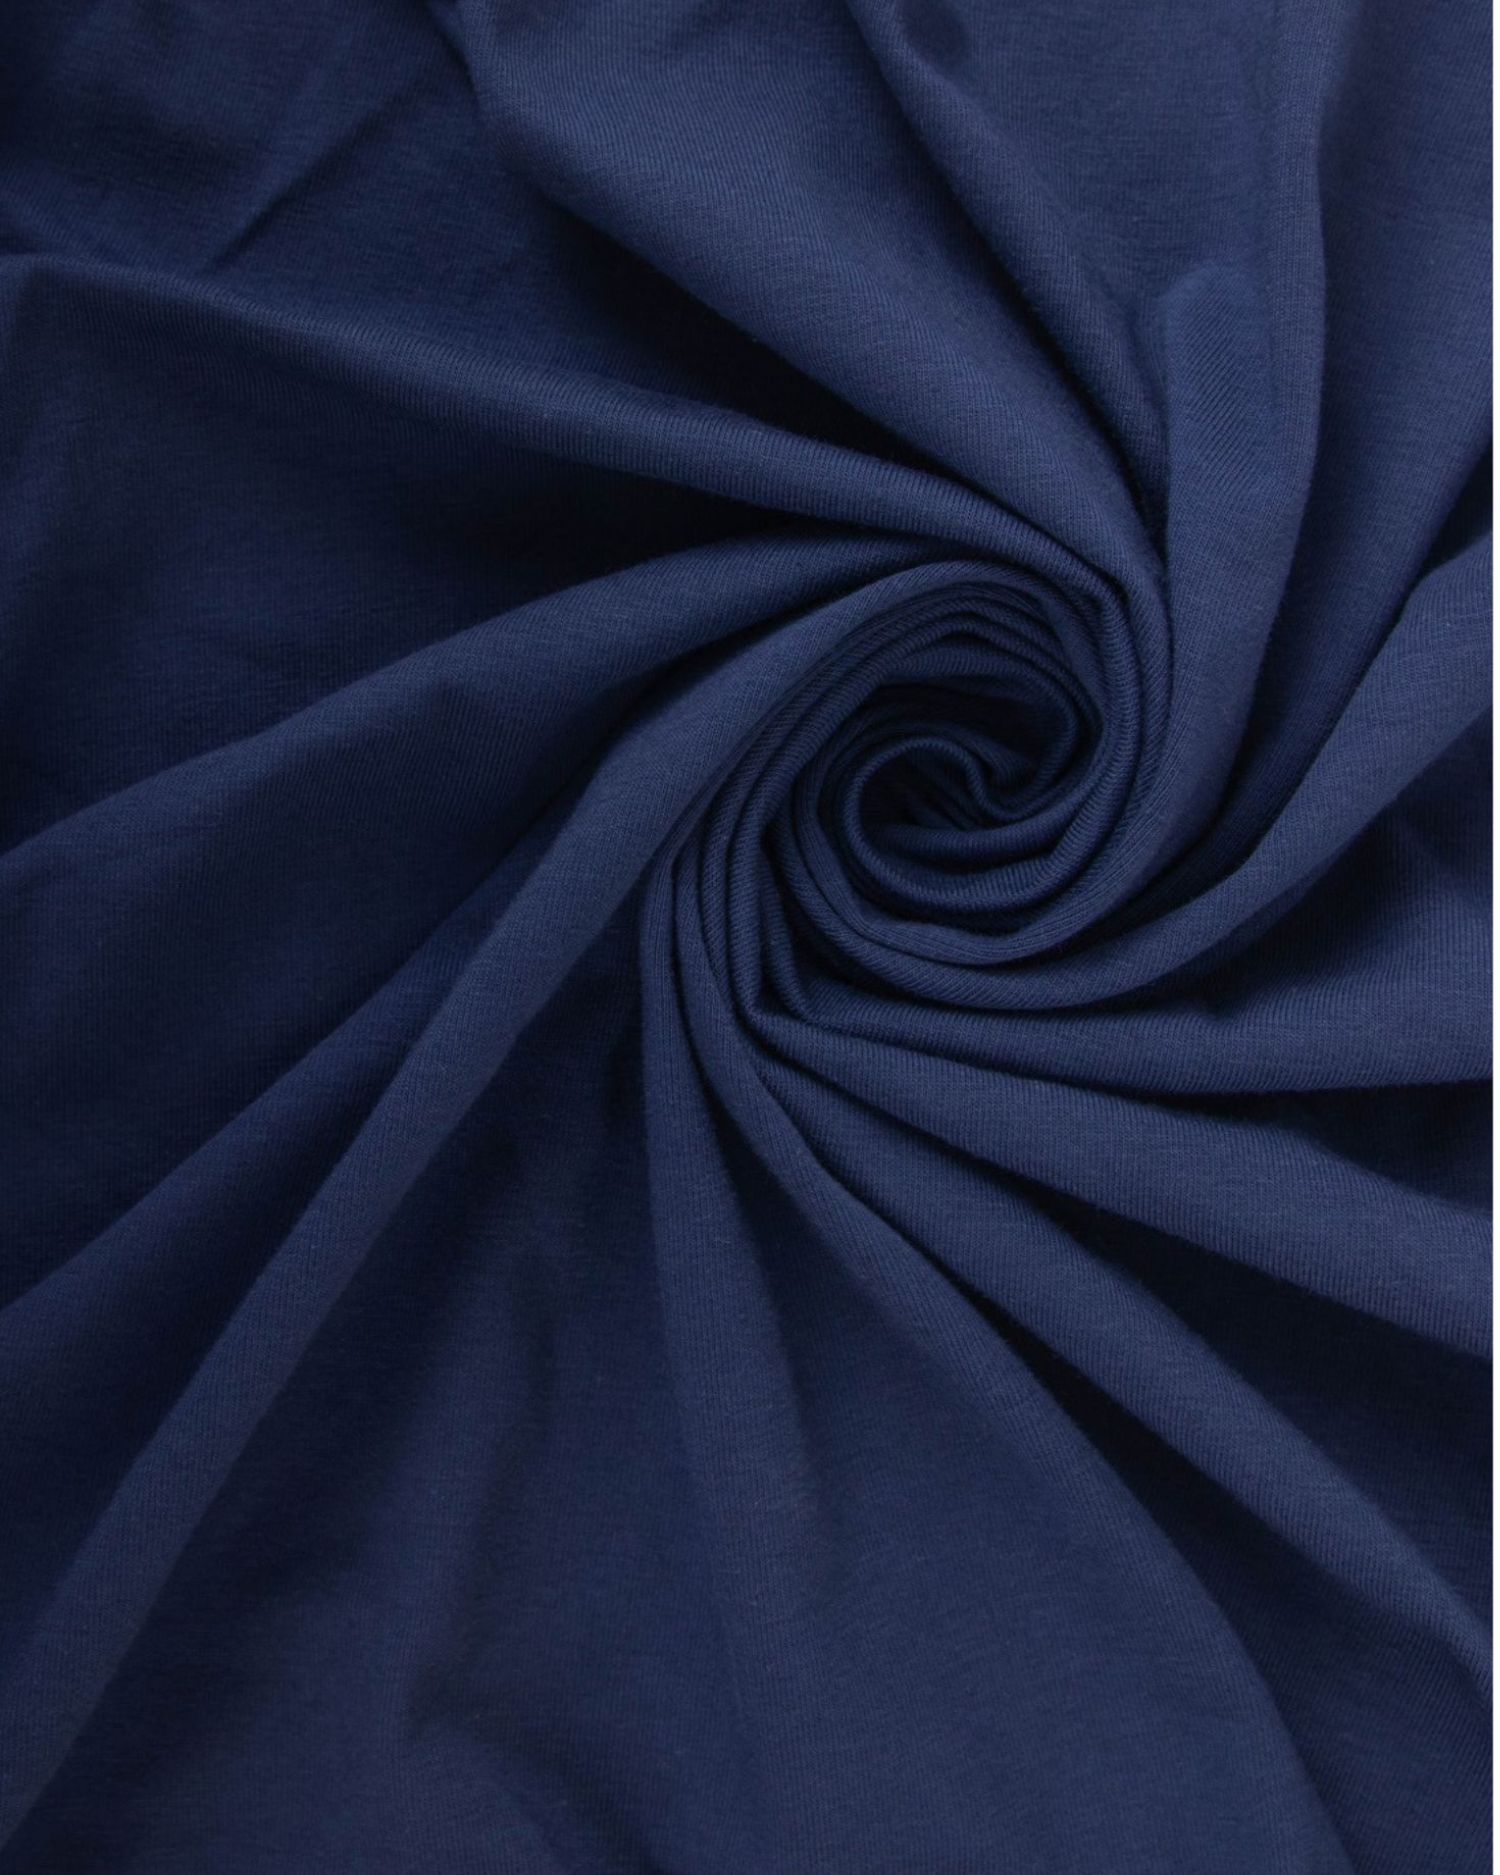 Cotton single Jersey with elastane, 1 meter, 165gr/m2, jeans